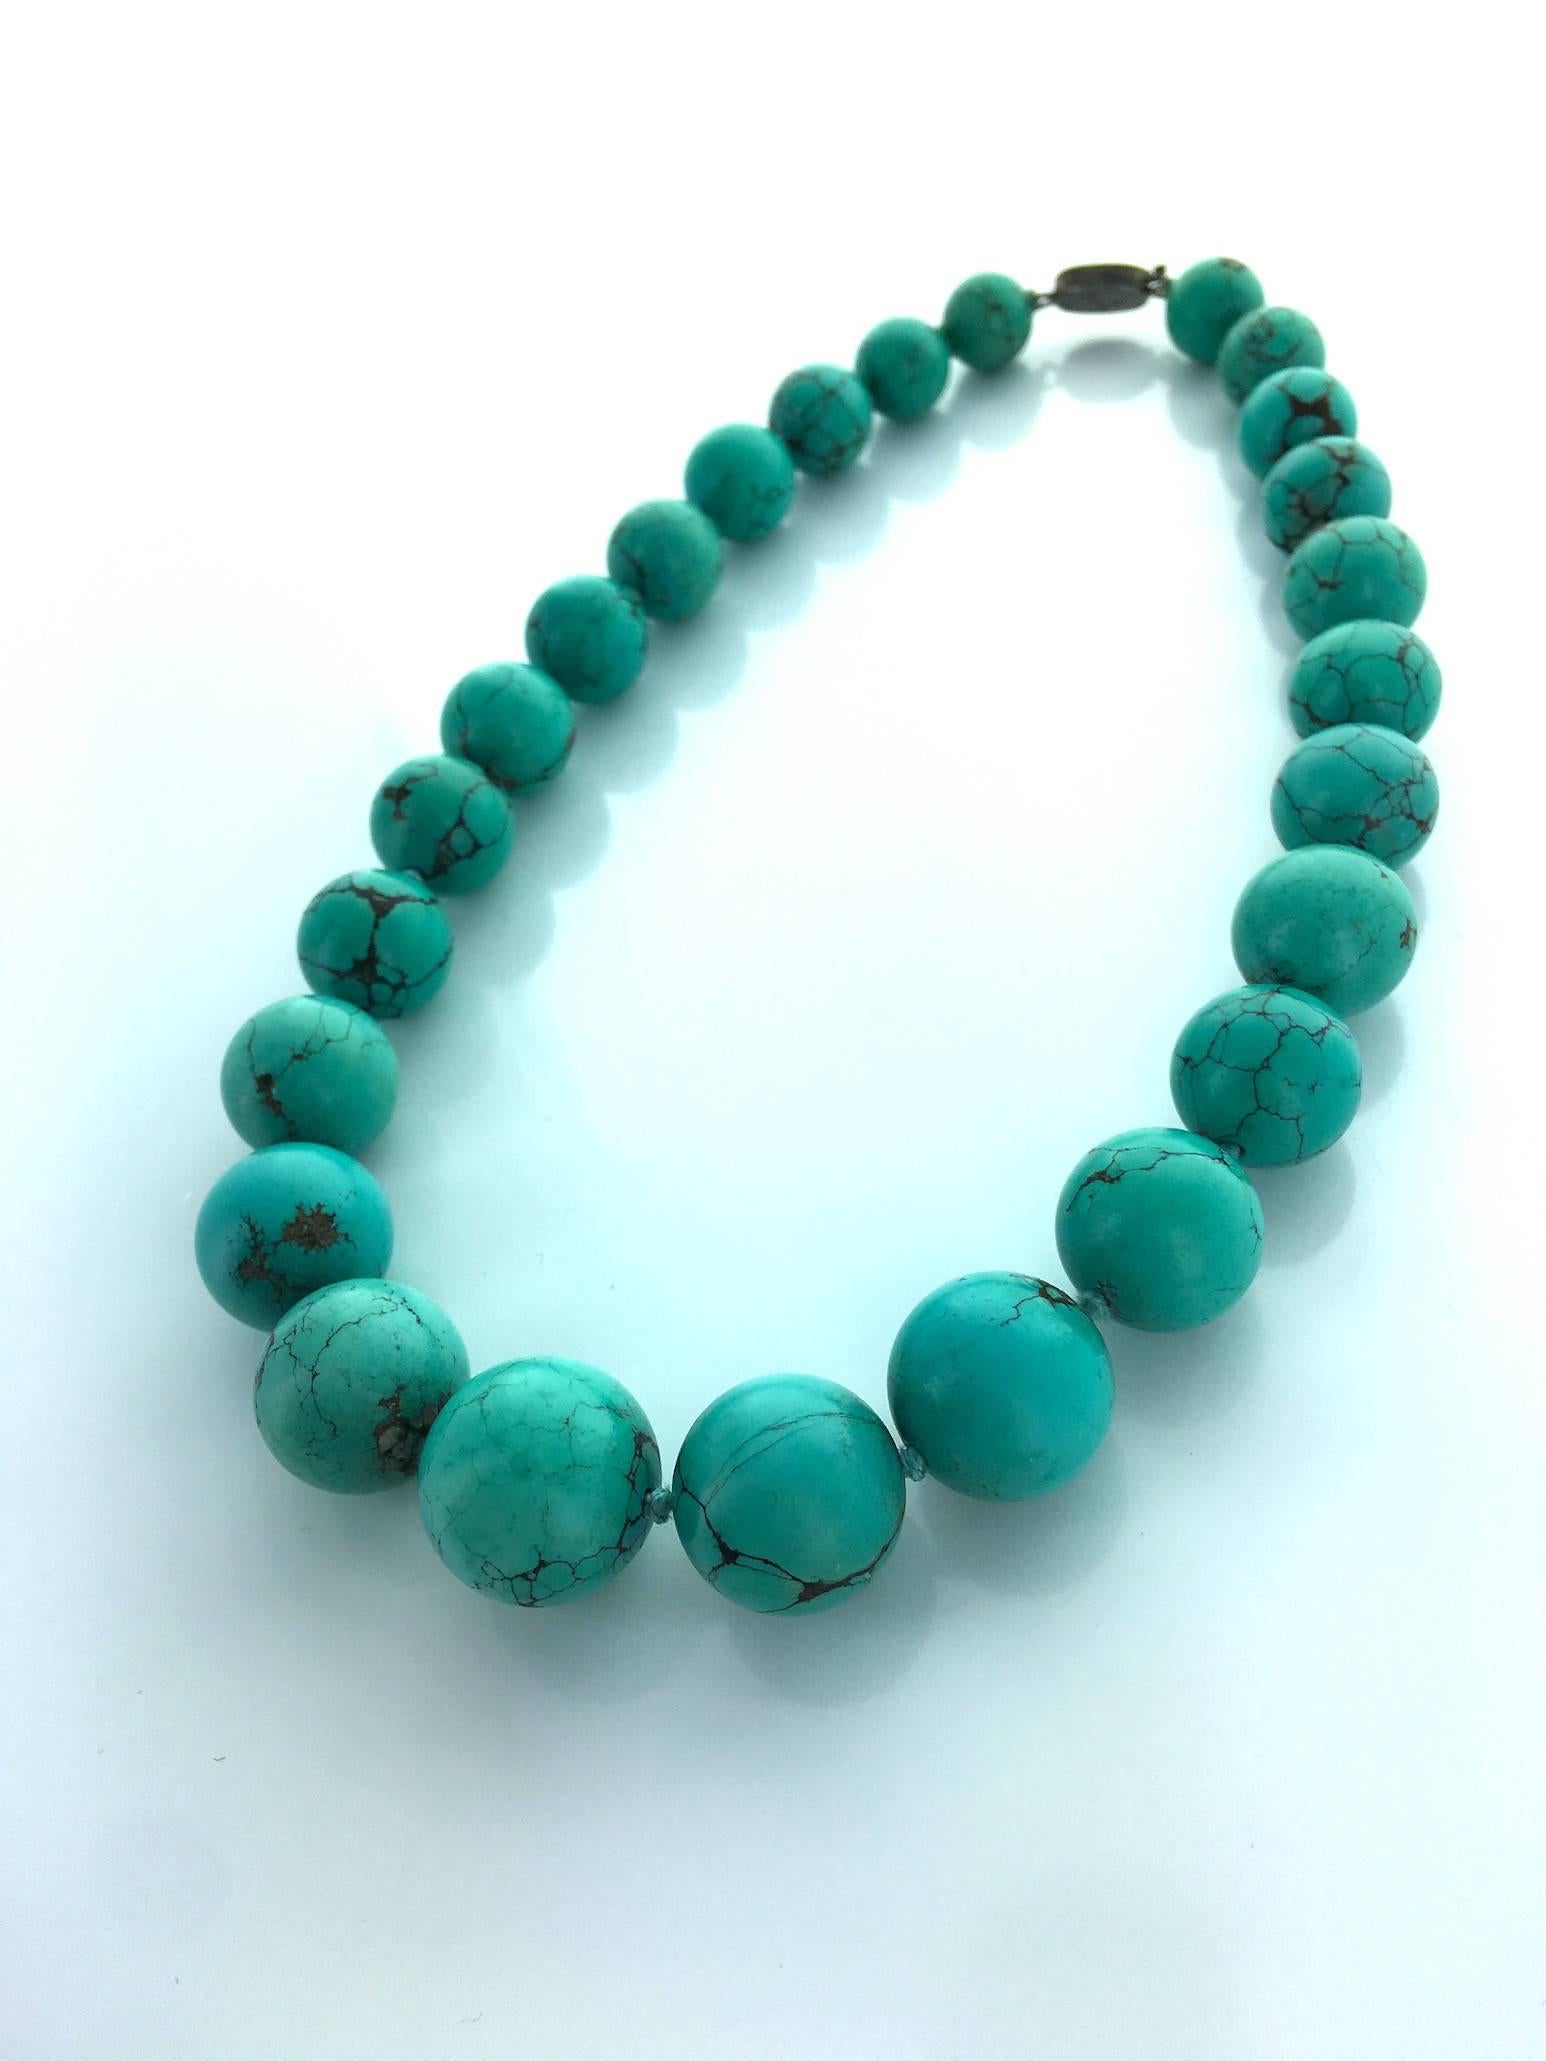 Rare Antique necklace gathering impressive volume Turquoise matrix ball.
Diameter from 0.43 to 0.71 inch. (11 to 18 millimeters).
Perfect color and condition. 
Circa 1900.
Origin: Central Asia.

Total length: 18.90 inches (48.00 centimeters).
Clasp